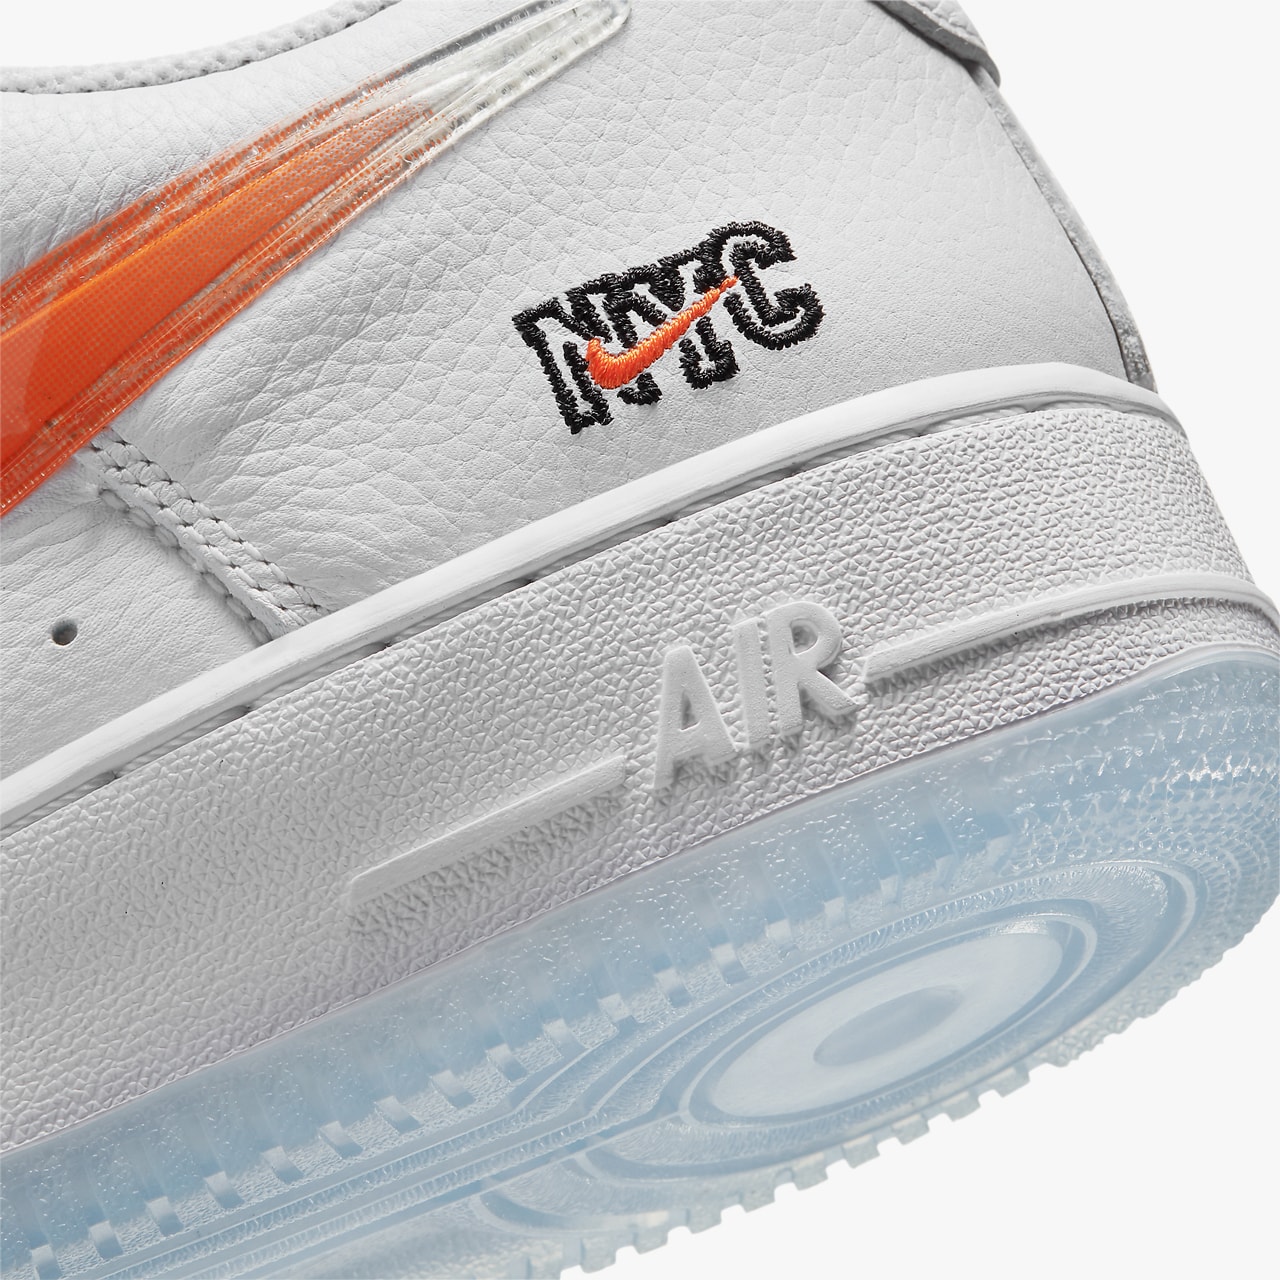 kith ronnie fieg nike sportswear air force 1 low nyc new york city white rush blue brilliant orange CZ7928 100 official release date info photos price store list buying guide